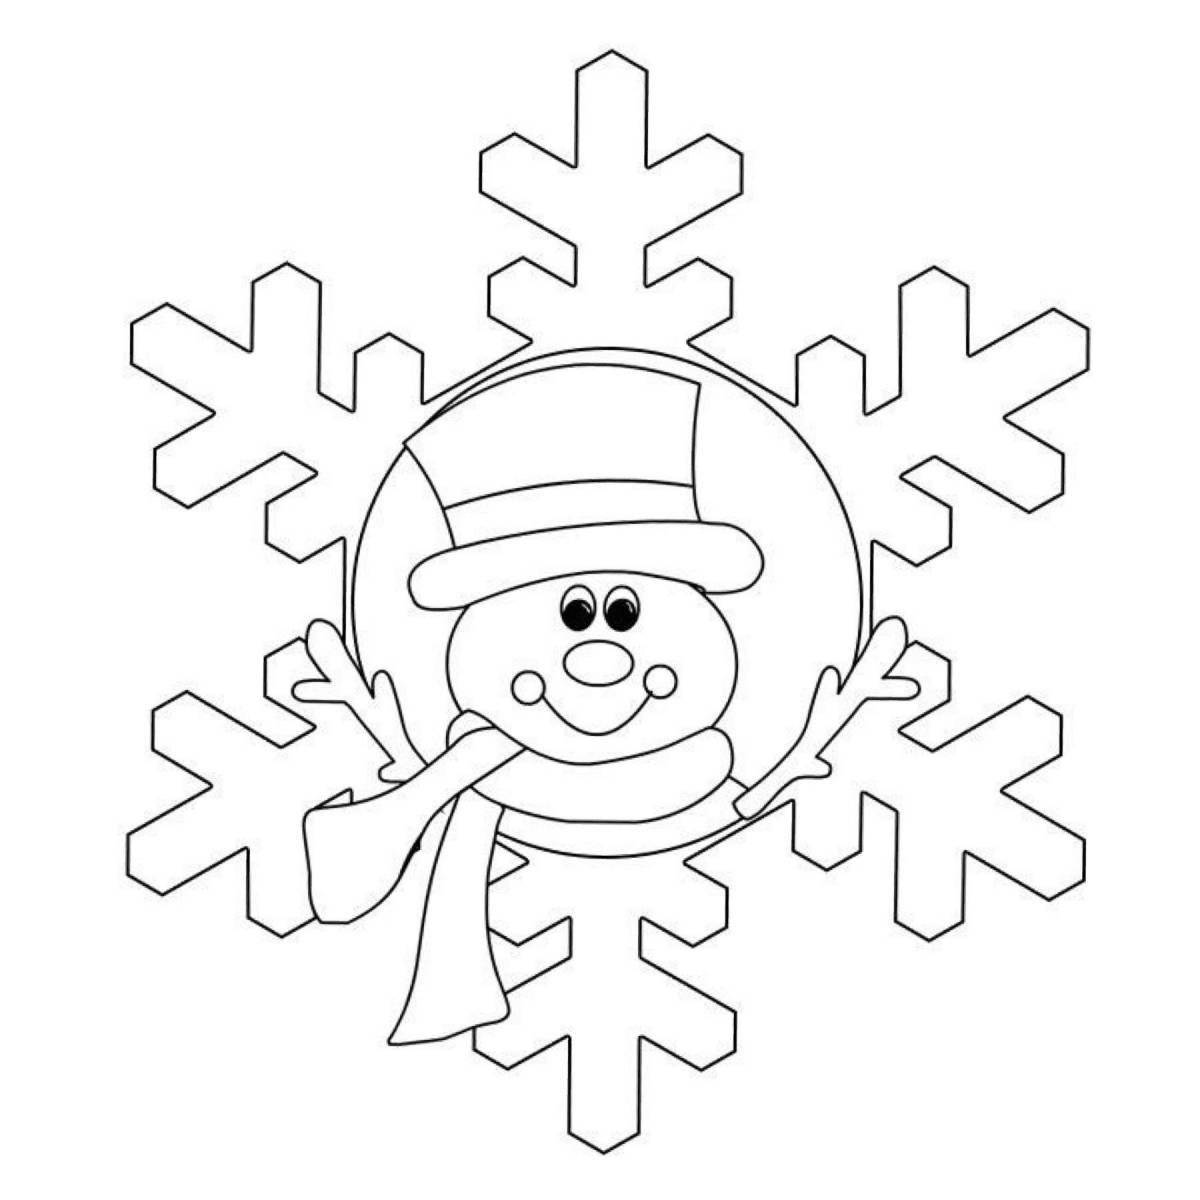 Adorable snowflake coloring book for kids 3-4 years old